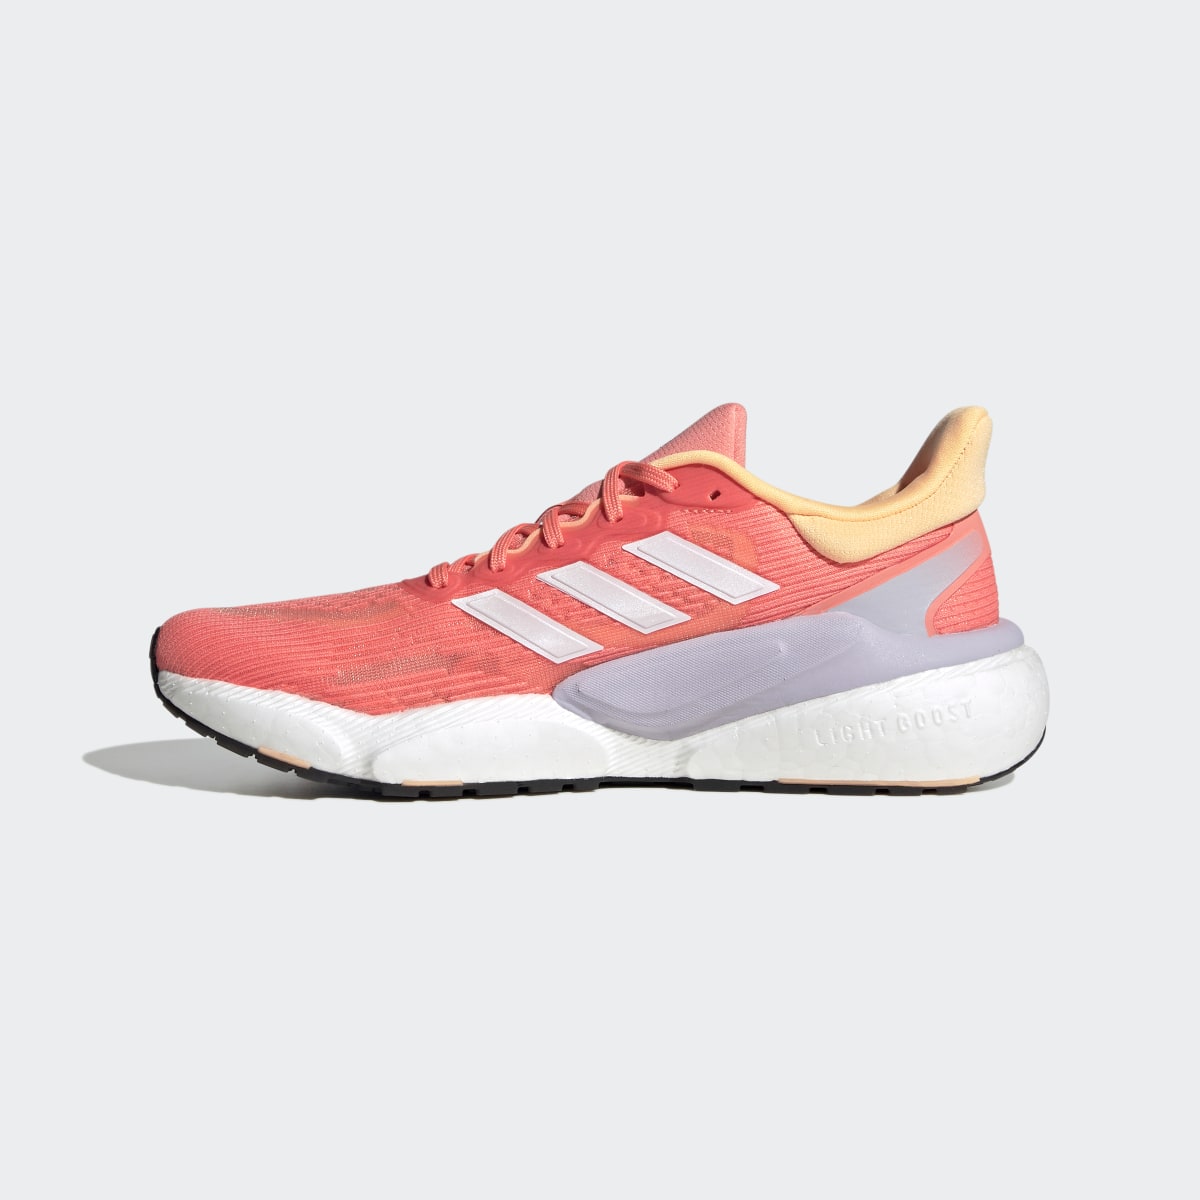 Adidas Solarboost 5 Shoes. 7